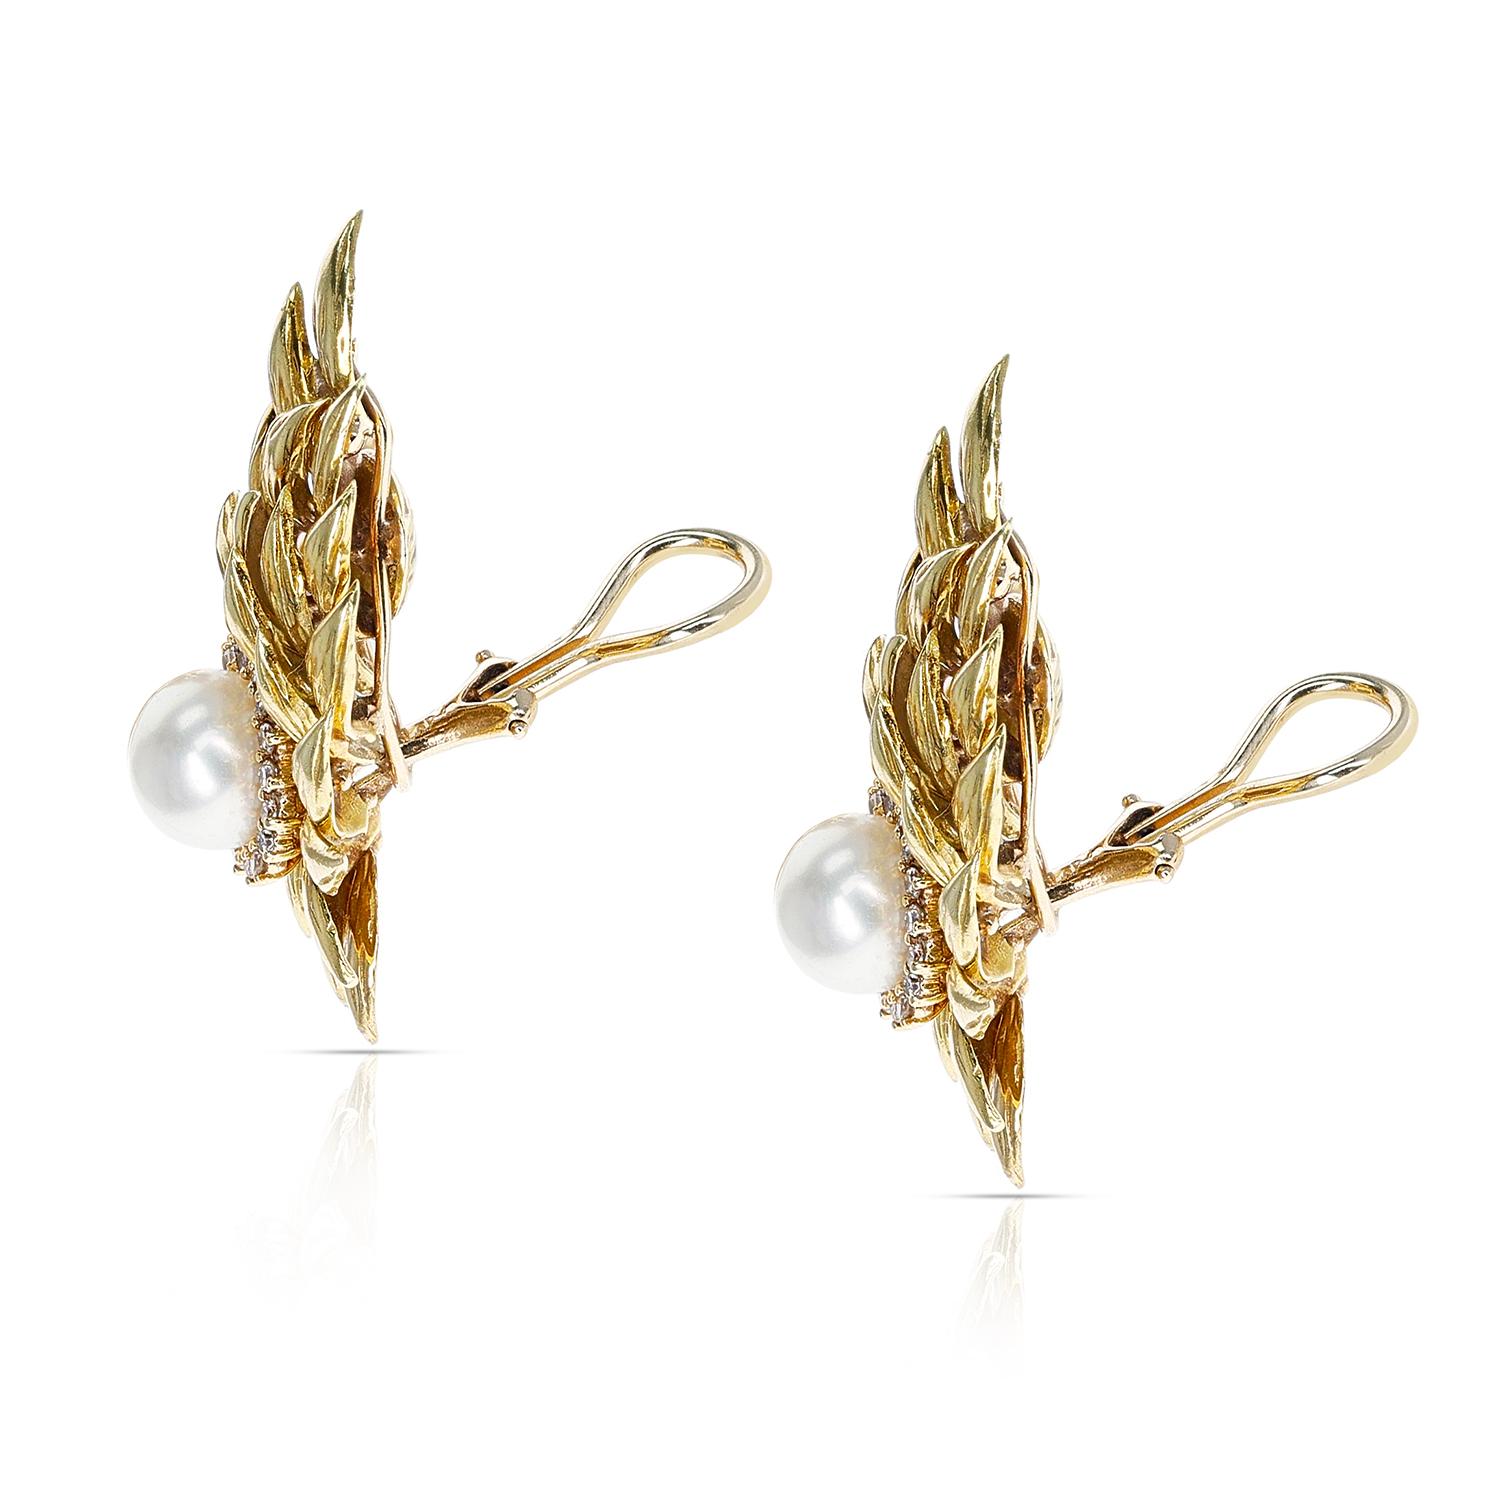 A 8MM Cultured Pearl Earrings with a Diamond Halo in 18K Gold Leaf-Style Design. The diamonds weigh appx. 0.40 carats. The earrings weigh a total of 10.50 grams. The dimensions are 1.5